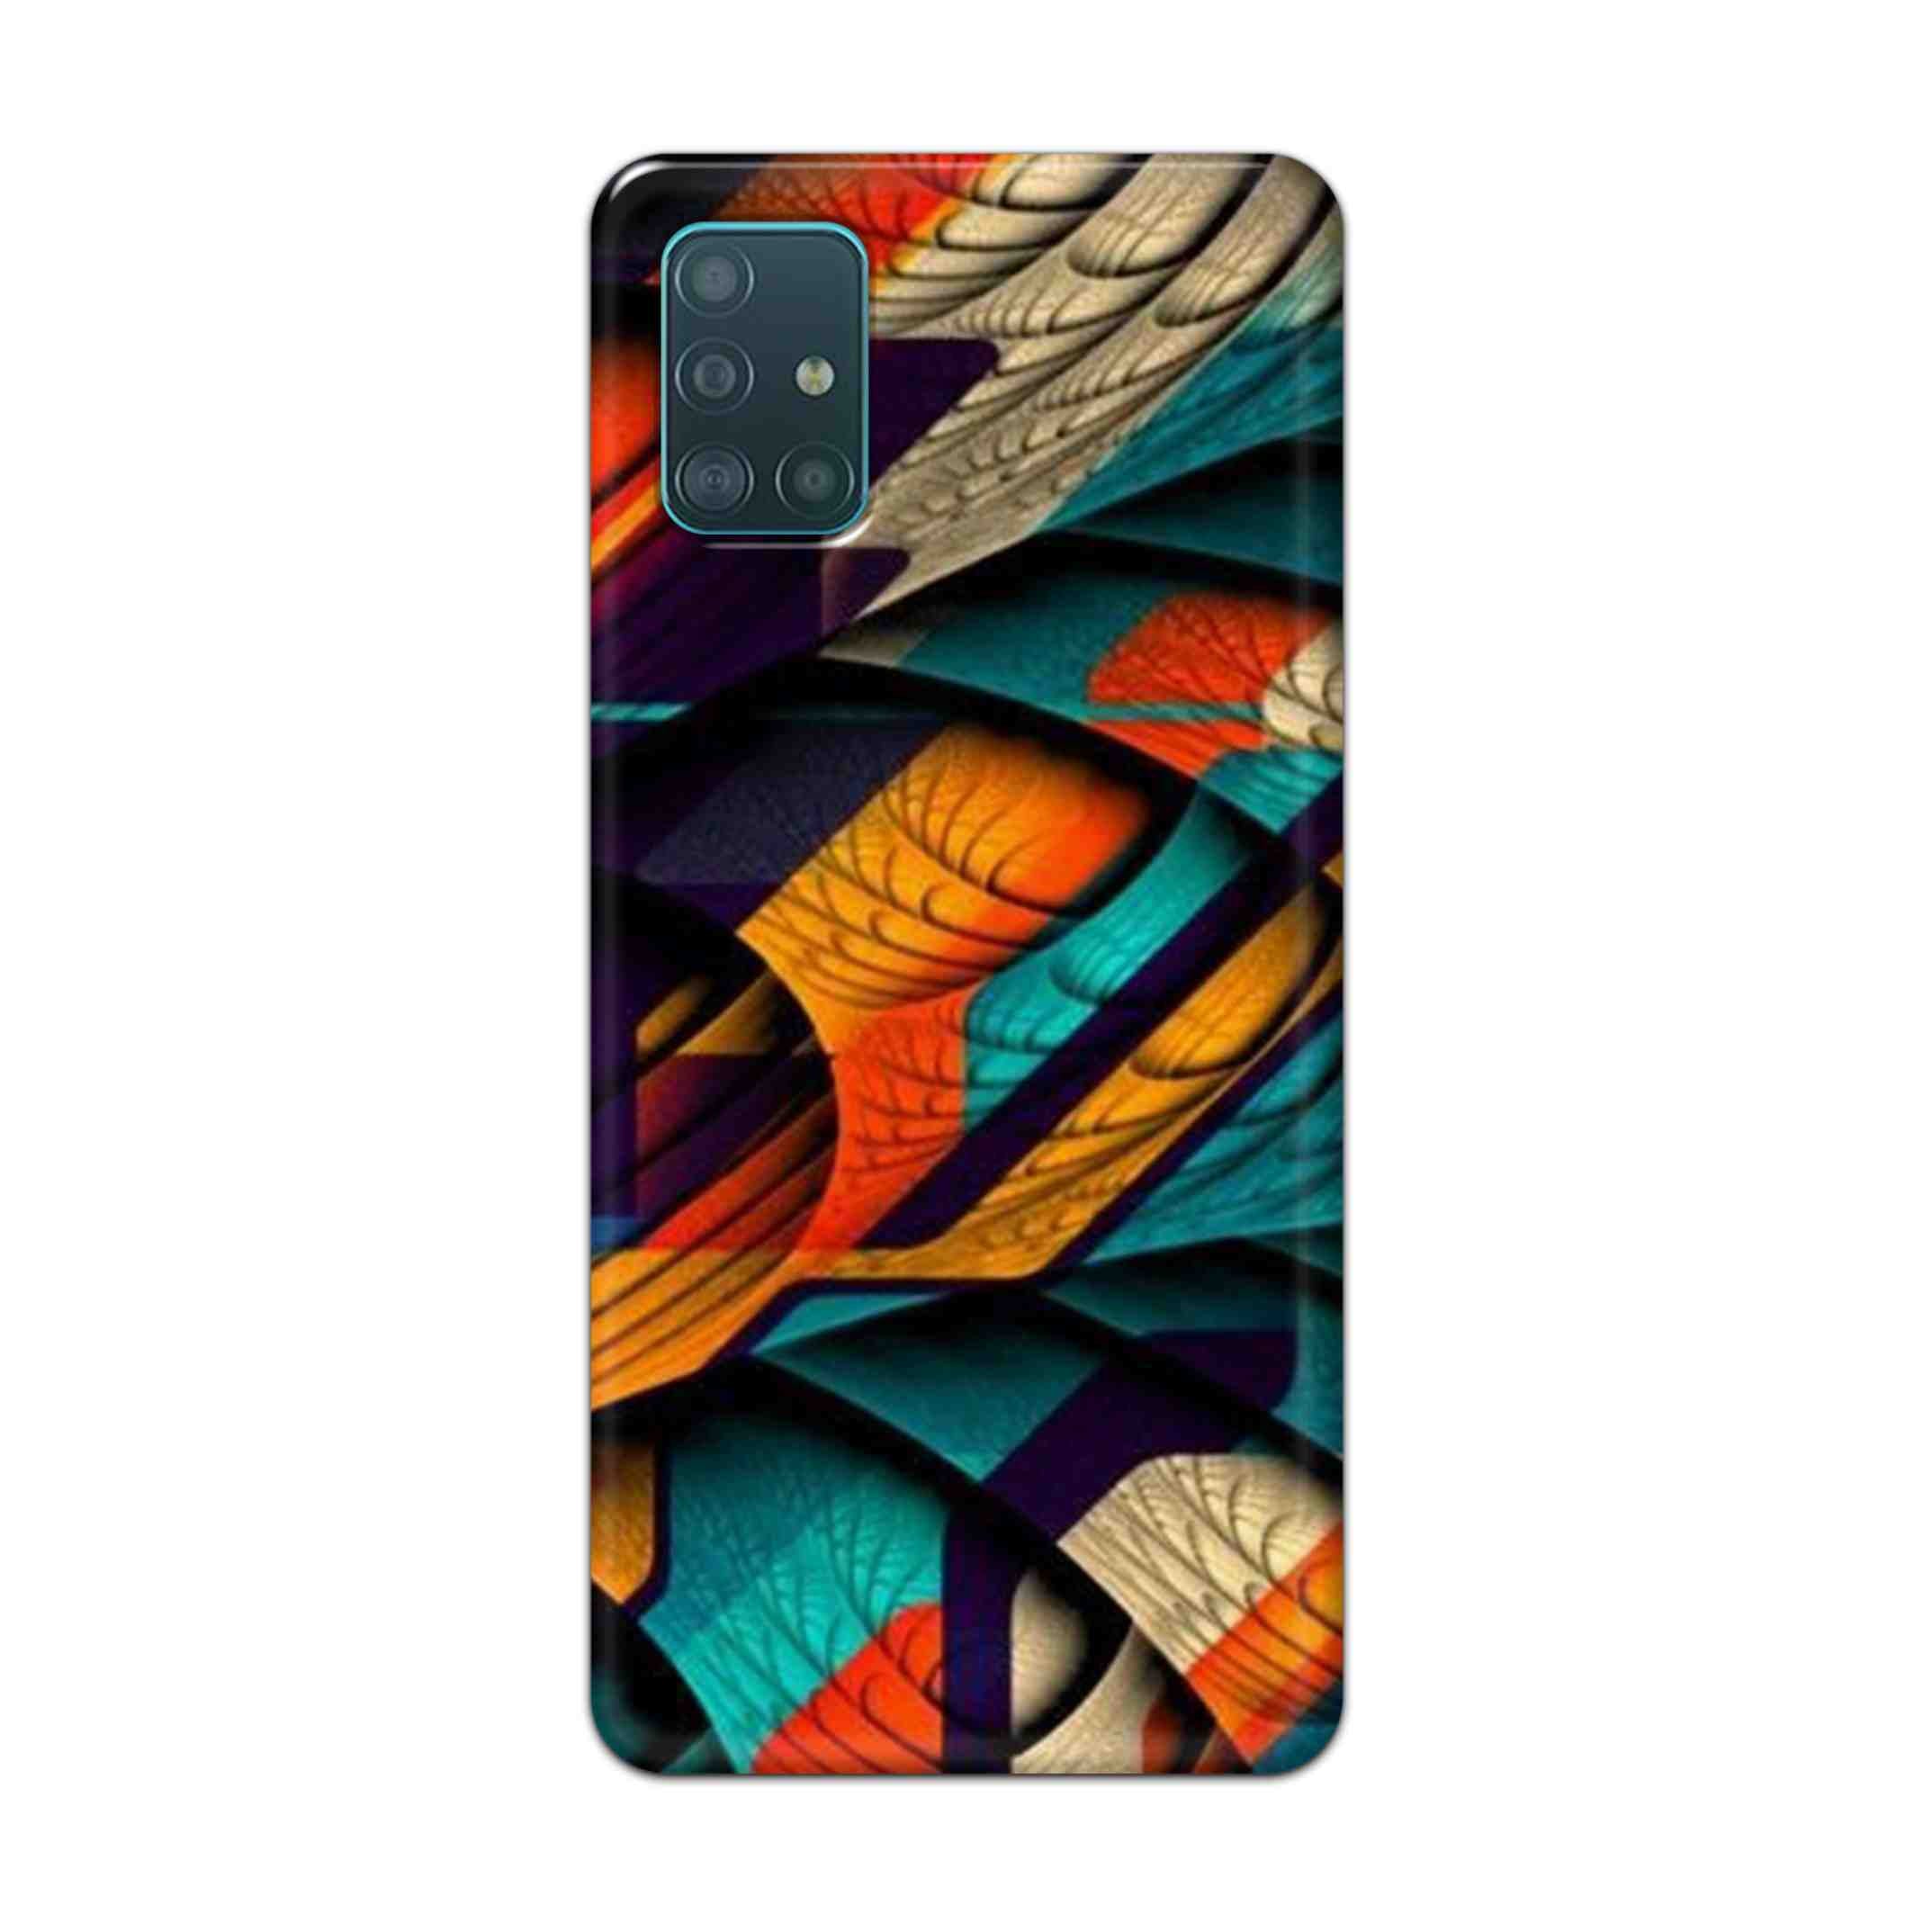 Buy Colour Abstract Hard Back Mobile Phone Case Cover For Samsung A51 Online